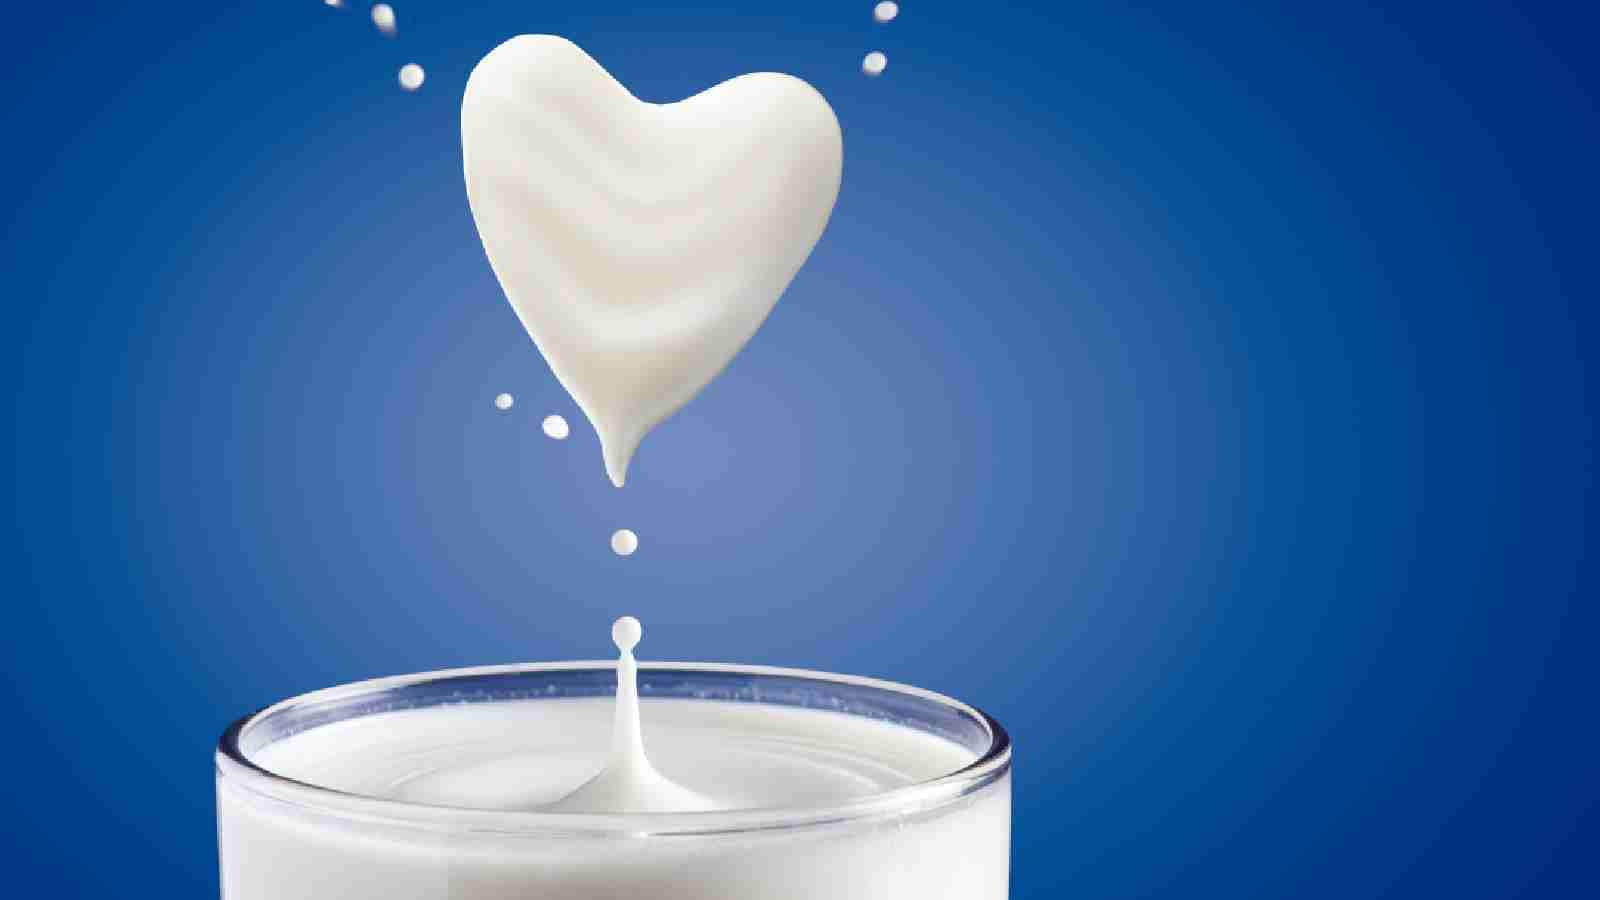 Calcium and heart health: How are they linked?